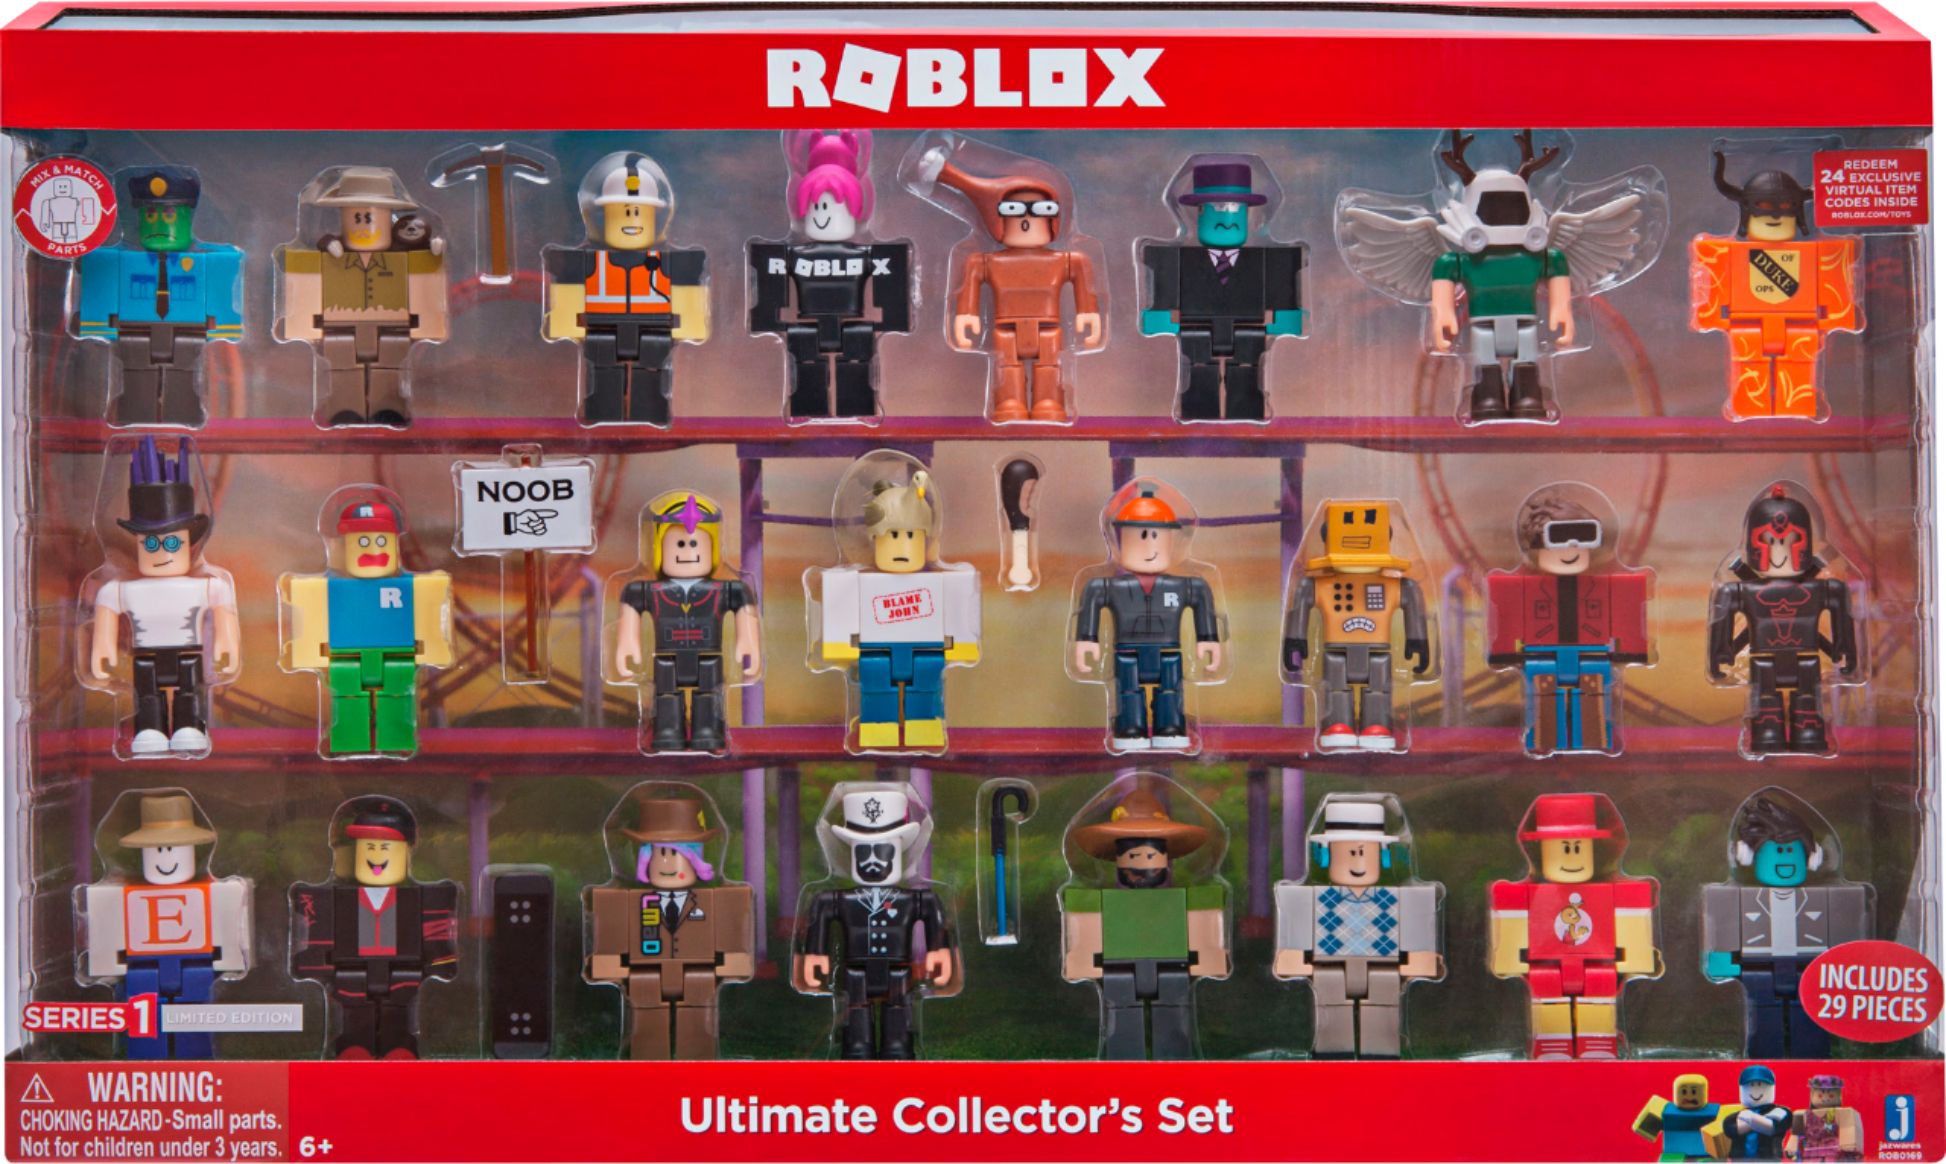 Best Buy Roblox Series 1 Ultimate Collector S Set Rob0172